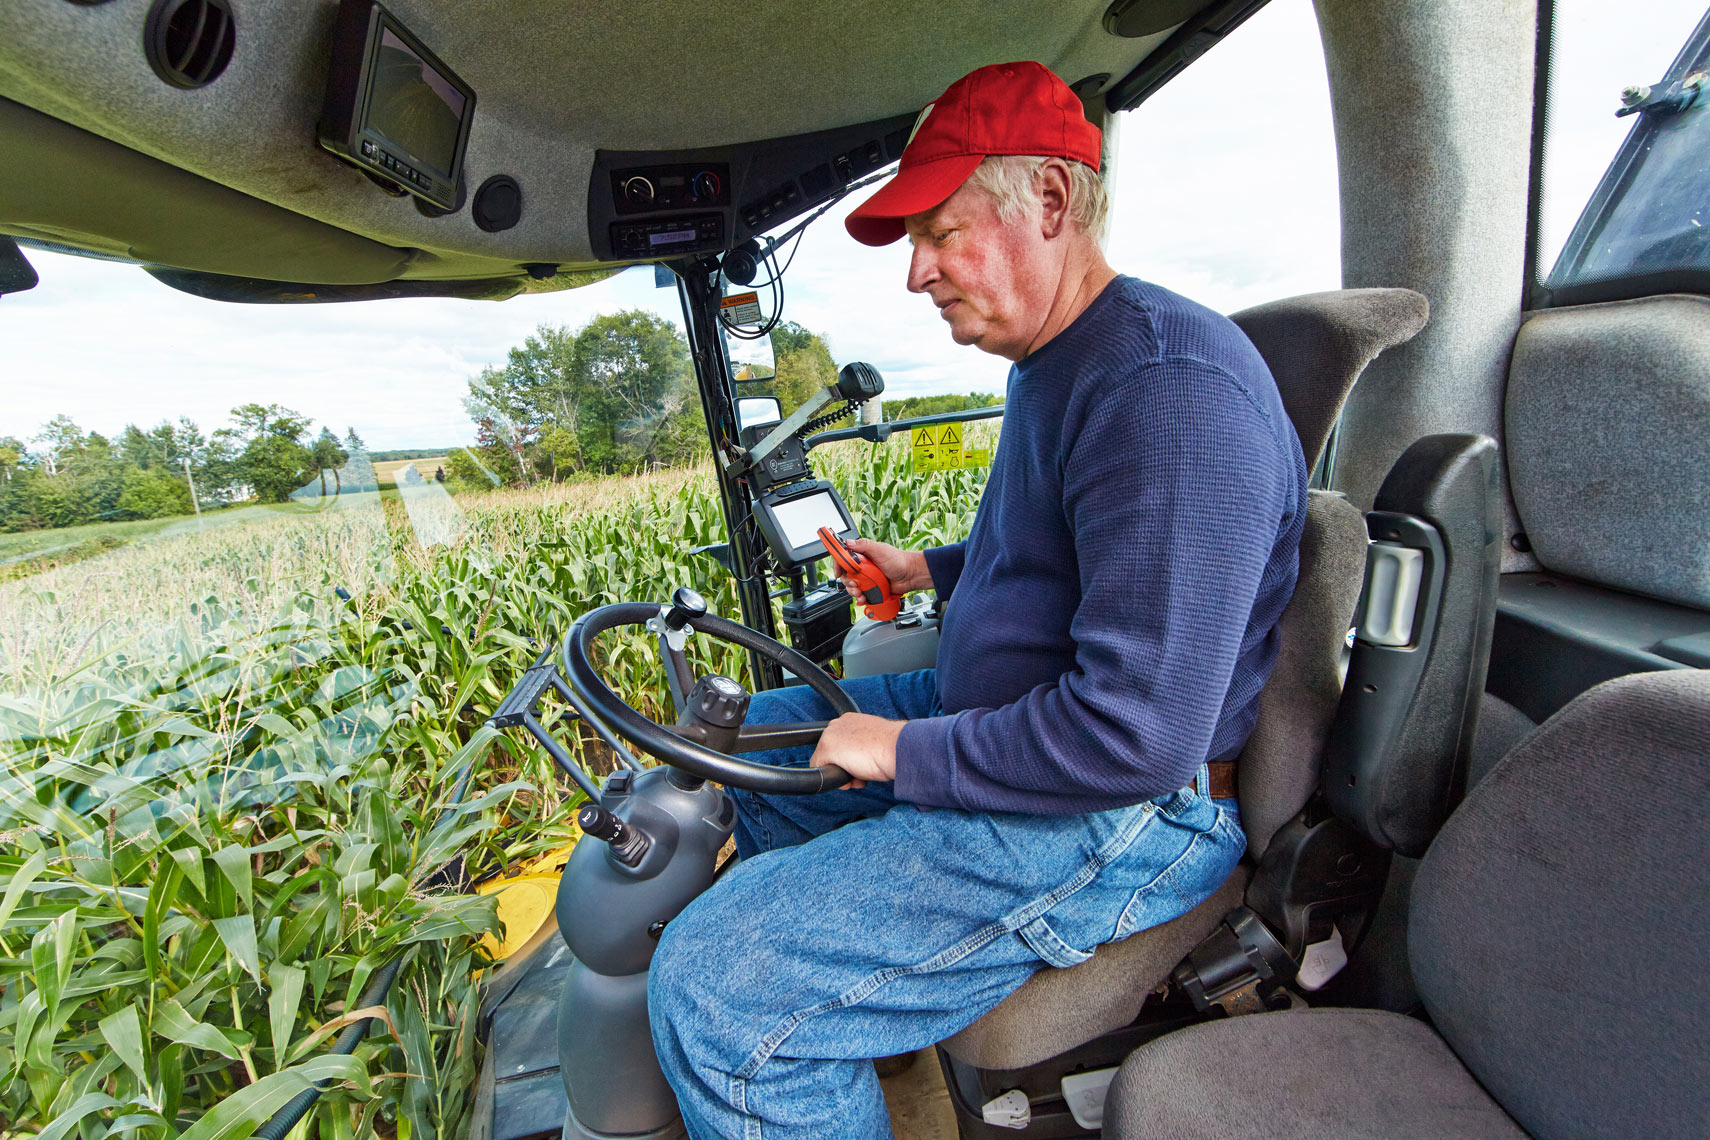 Farmer/inside tractor cab/corn field background/agriculture photography